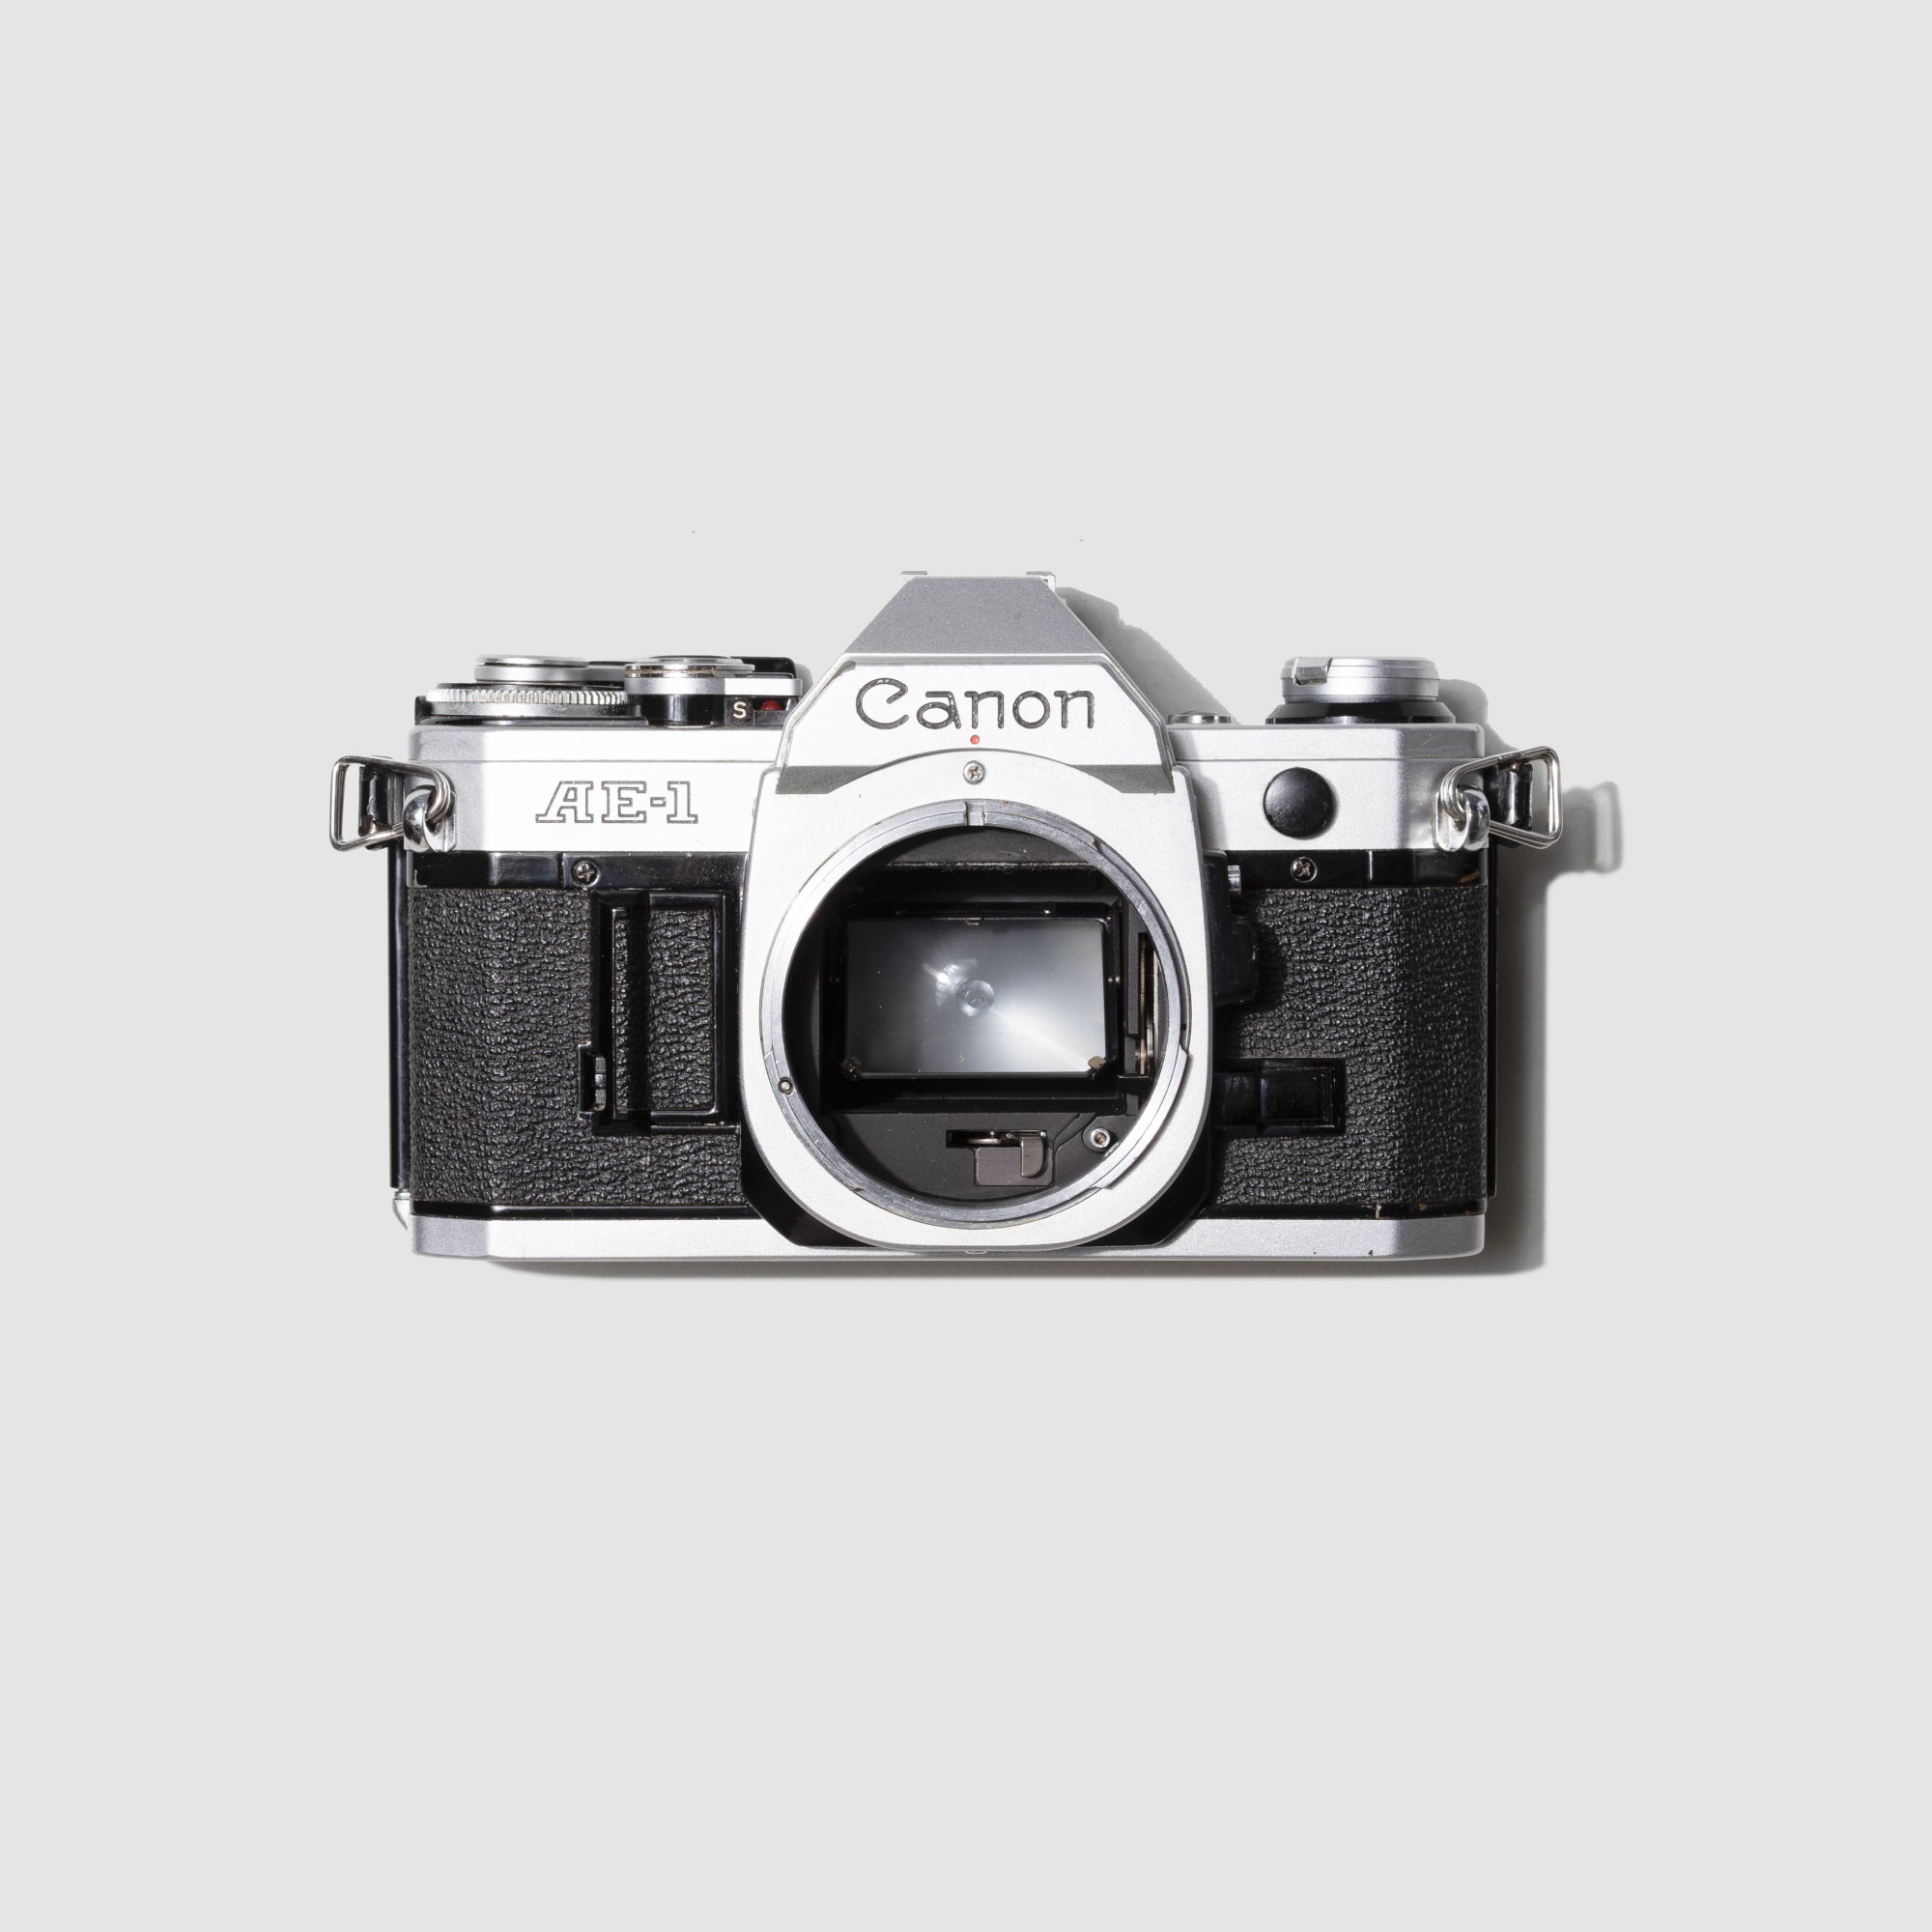 Buy Canon AE-1 now at Analogue Amsterdam